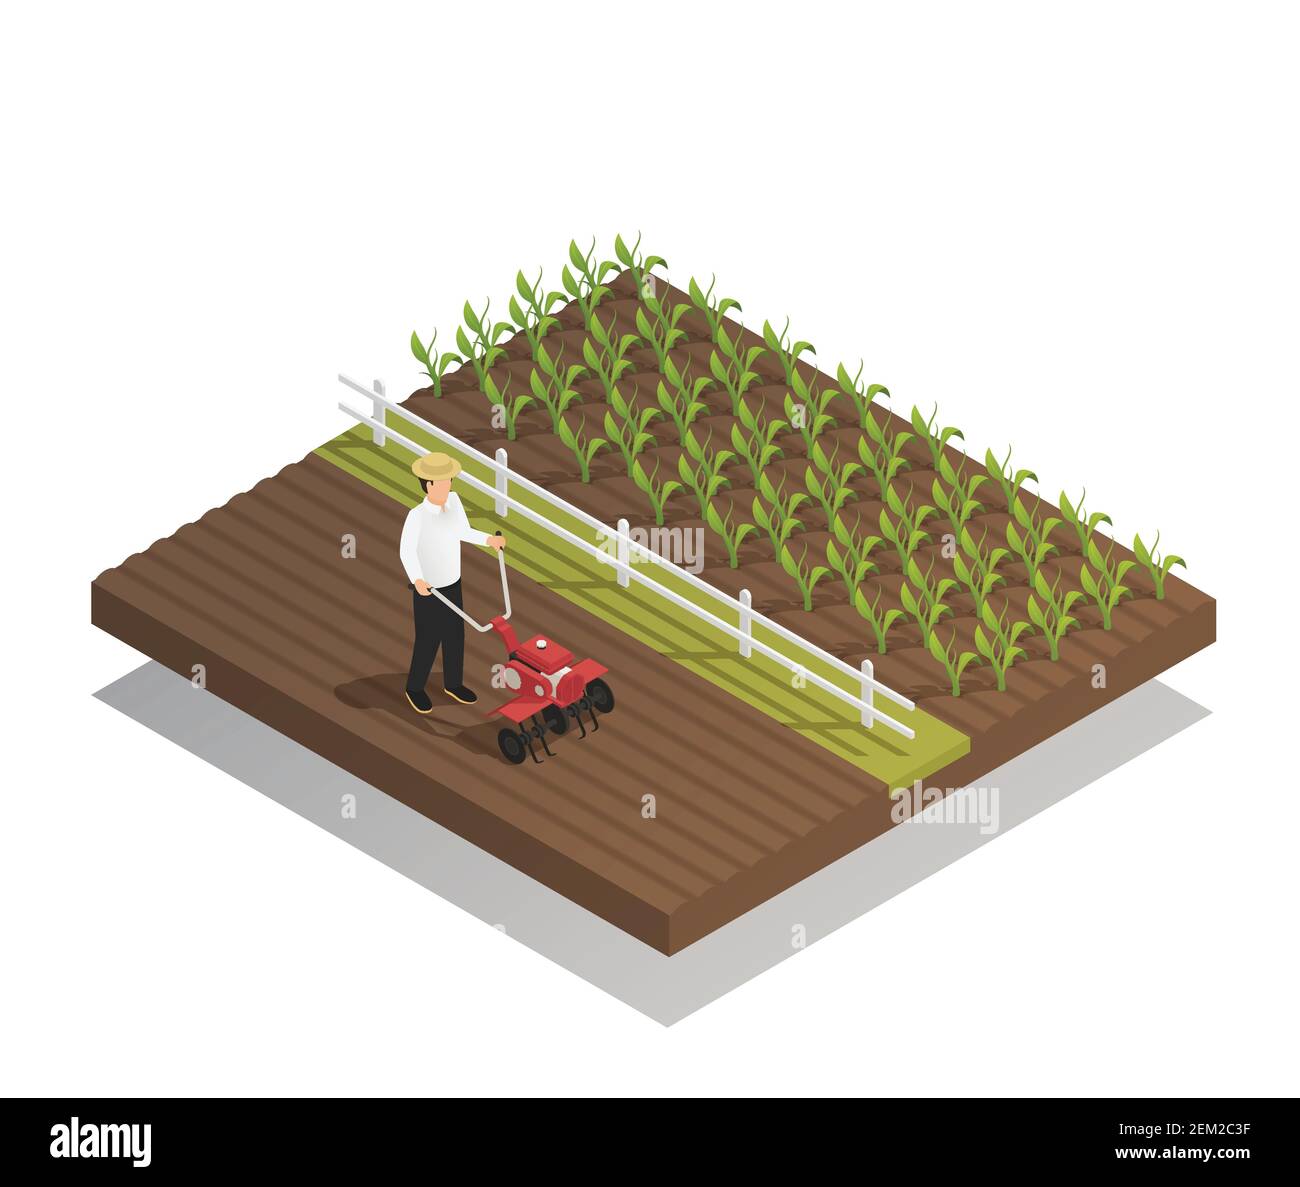 Farming machinery agricultural equipment isometric composition with hand push rotary garden cultivator harrowing and growing crops vector illustration Stock Vector